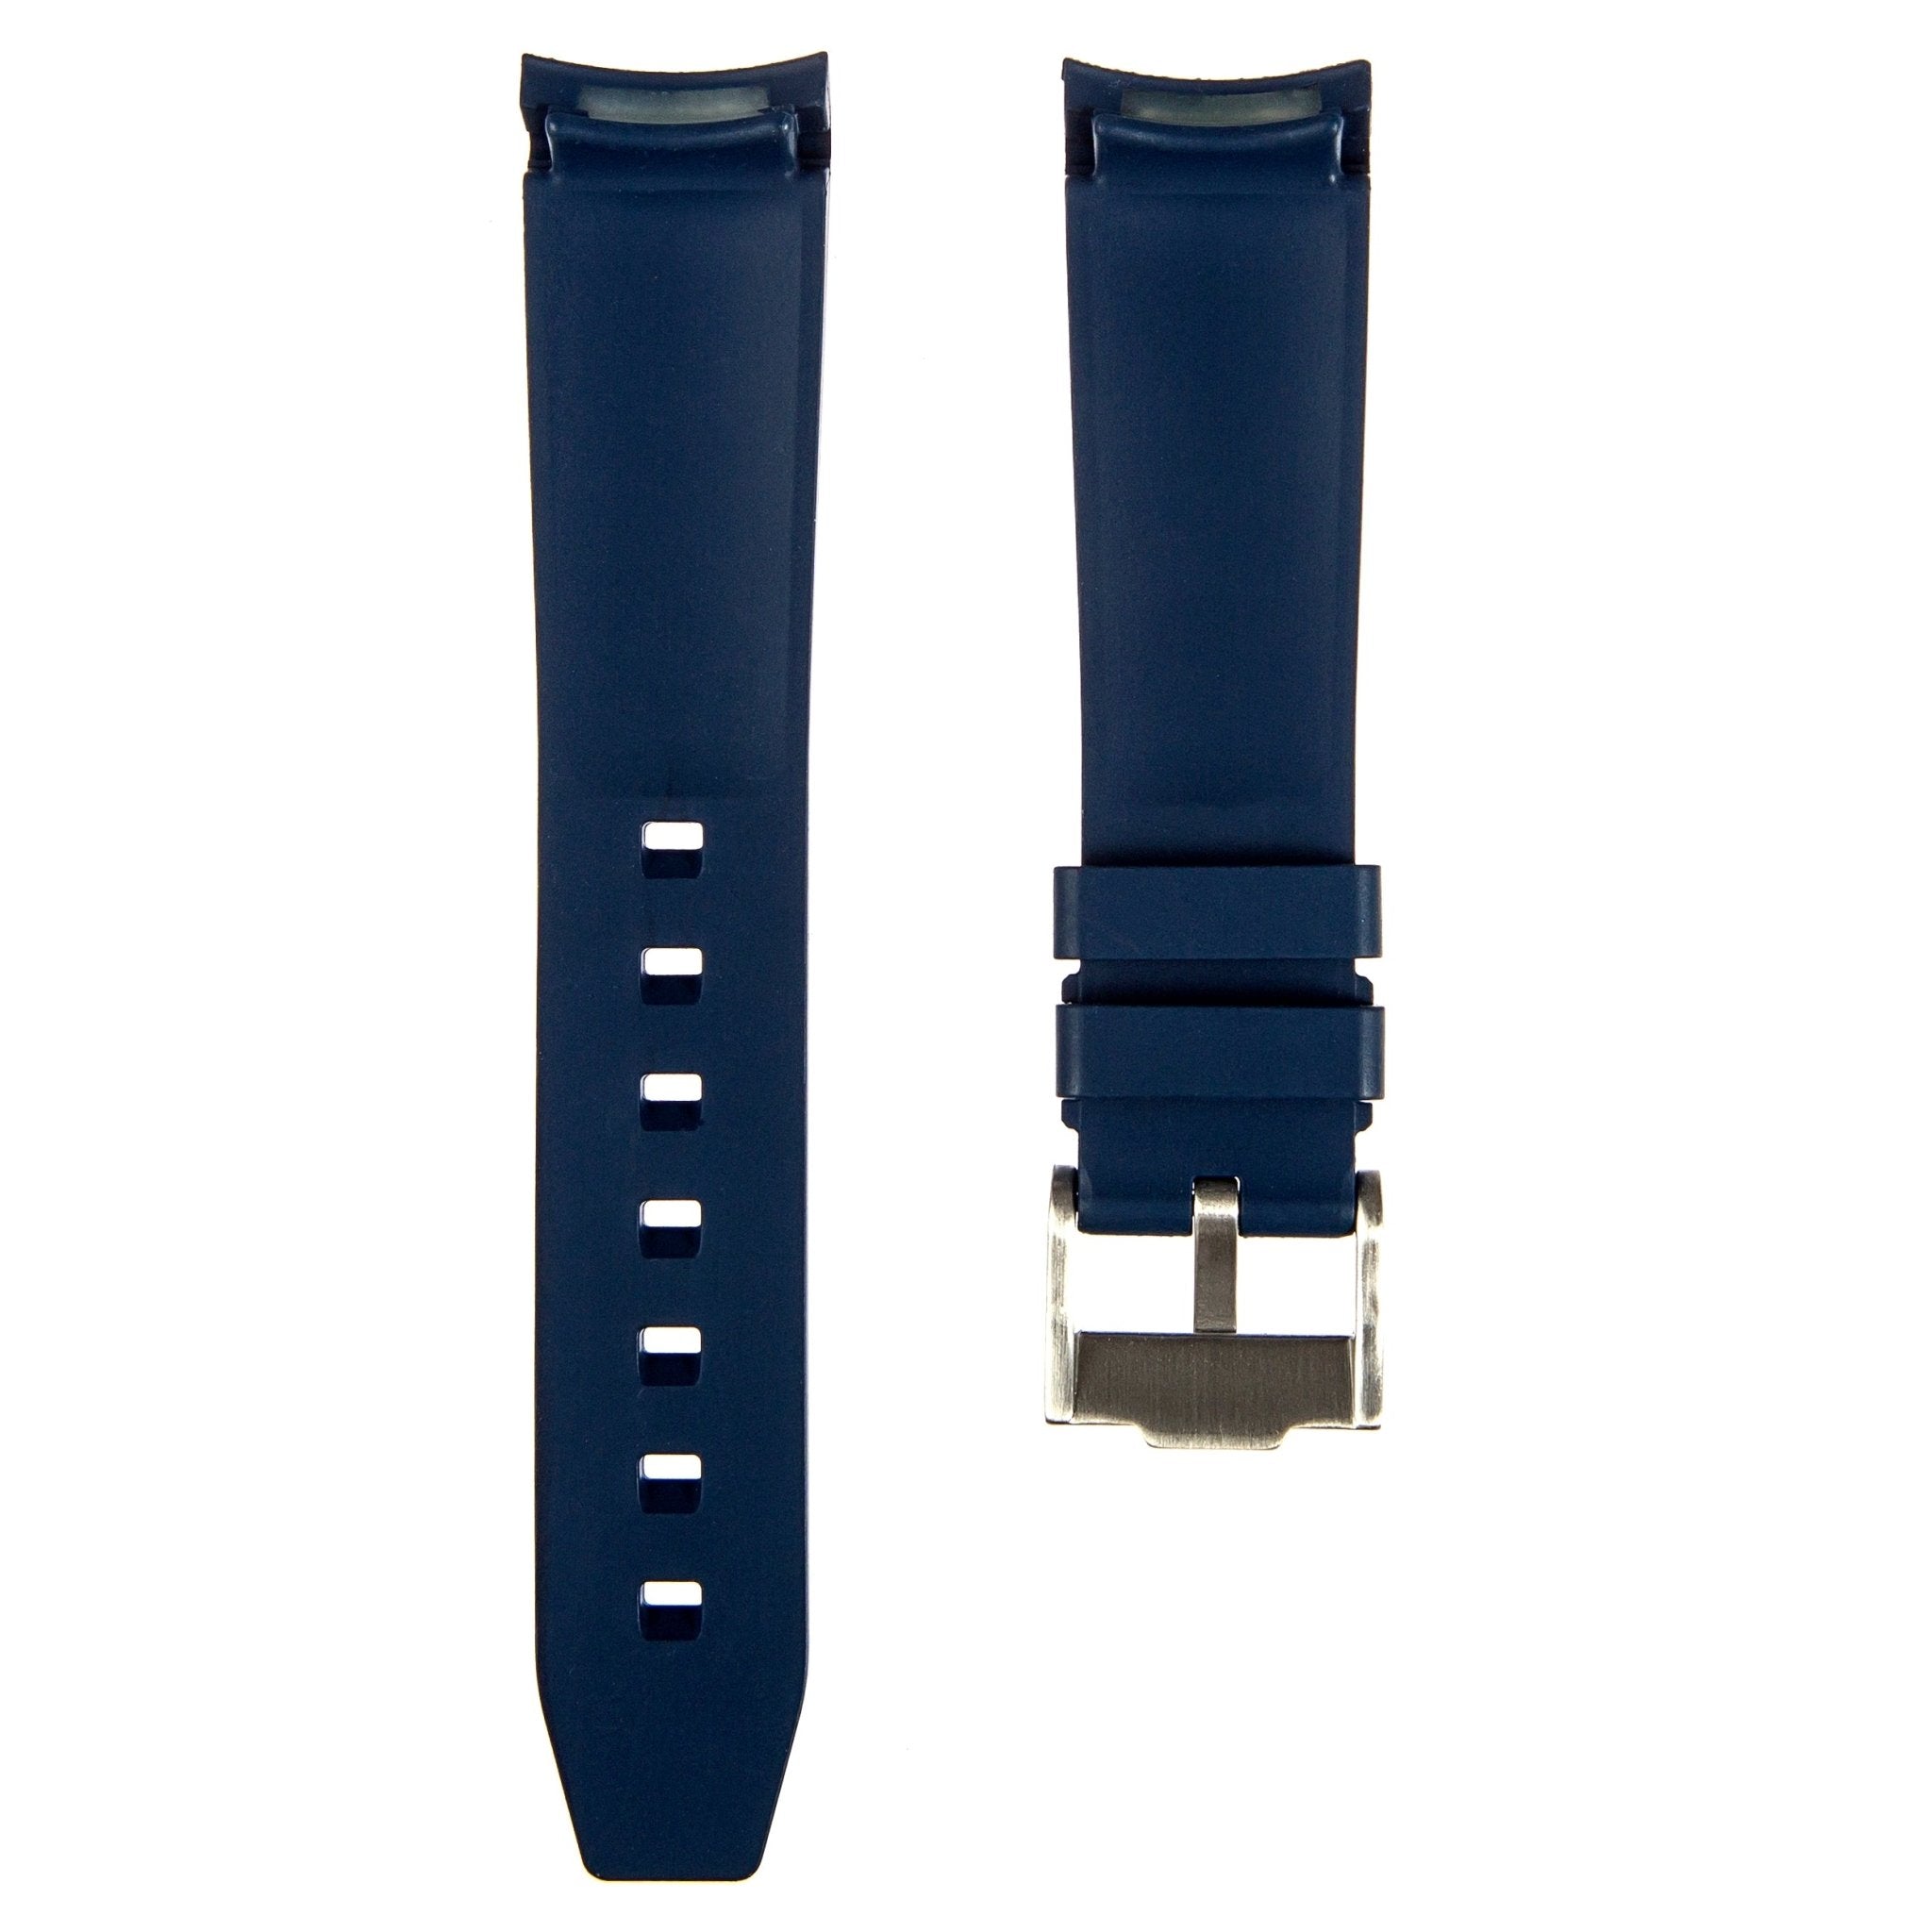 Forge Curved End FKM Rubber Strap – Compatible with Omega X Swatch – Navy (2421) -Strapseeker